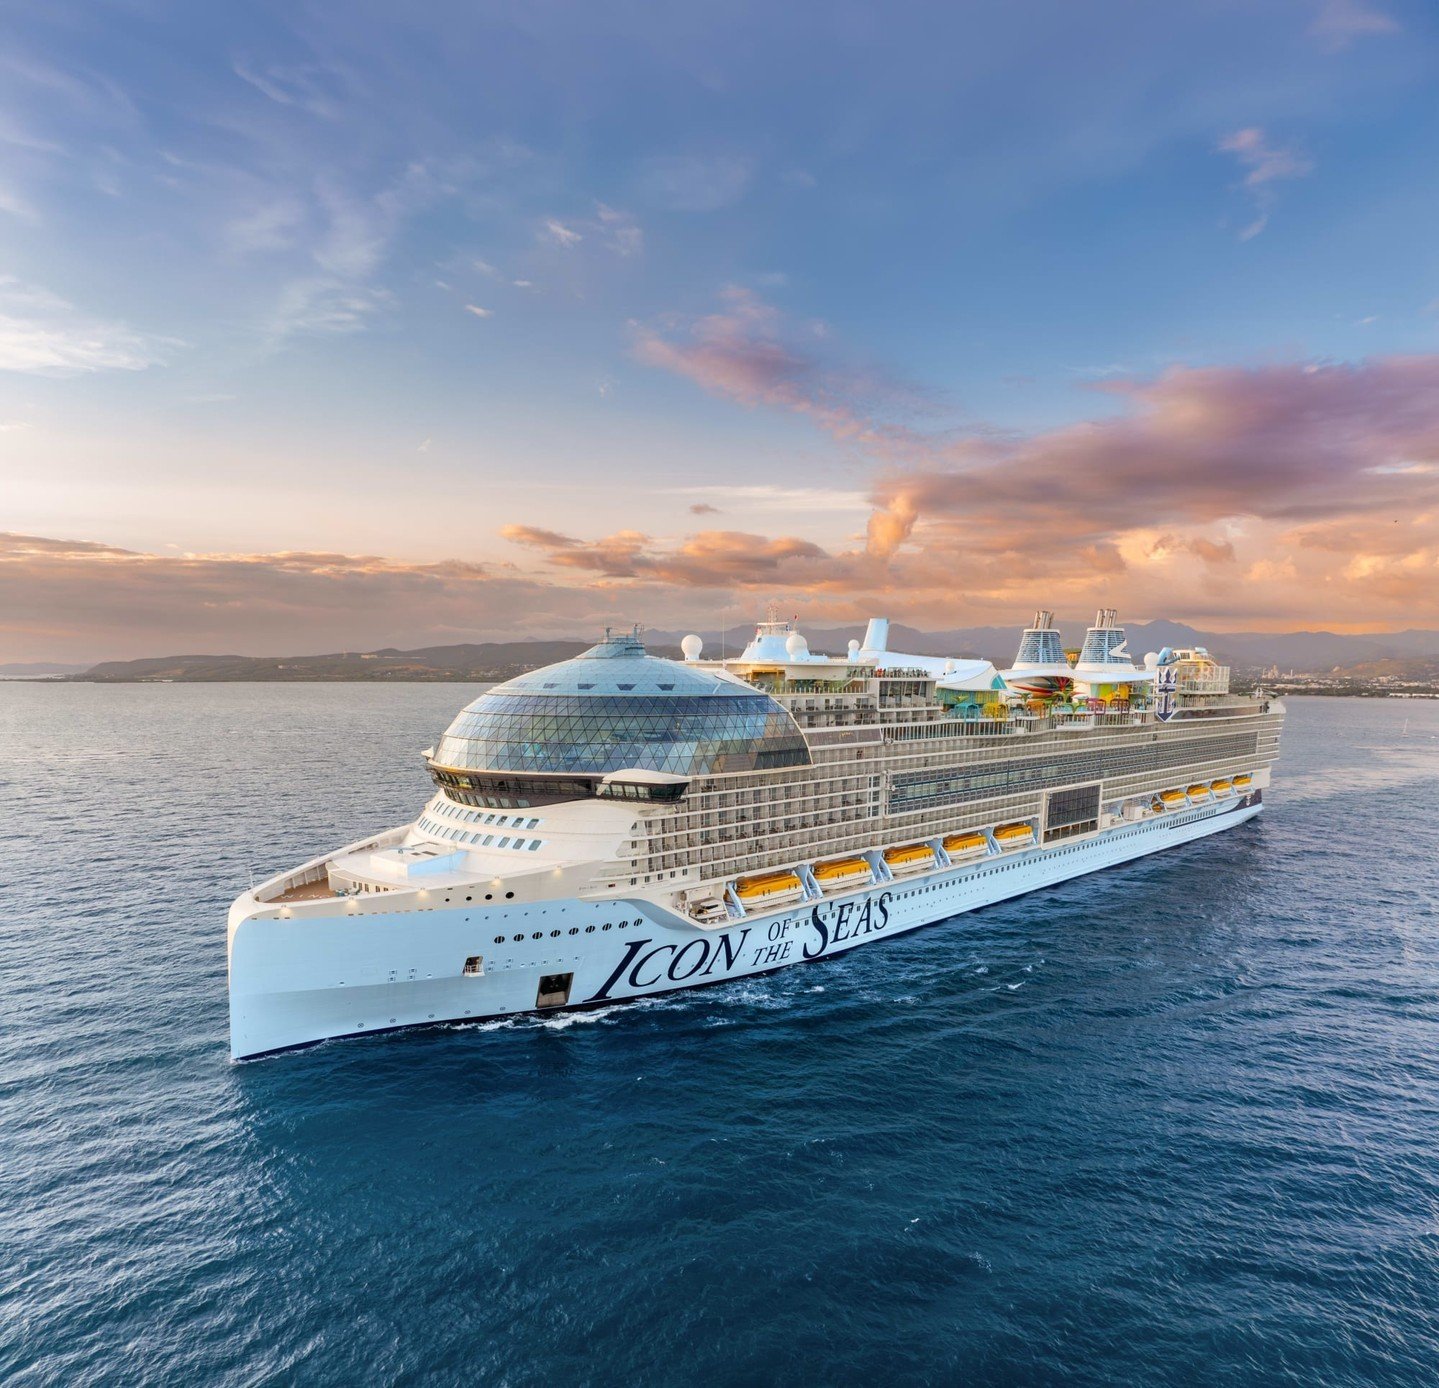 Set sail on the adventure of a lifetime 🚢🌊 Discover the all-new Icon of the Seas- the fist Icon Class Ship! Here's to sailing 100 days of sunsets, smiles, and seas. 🌅✨ #IconOfTheSeas #RoyalCaribbean 
Contact me